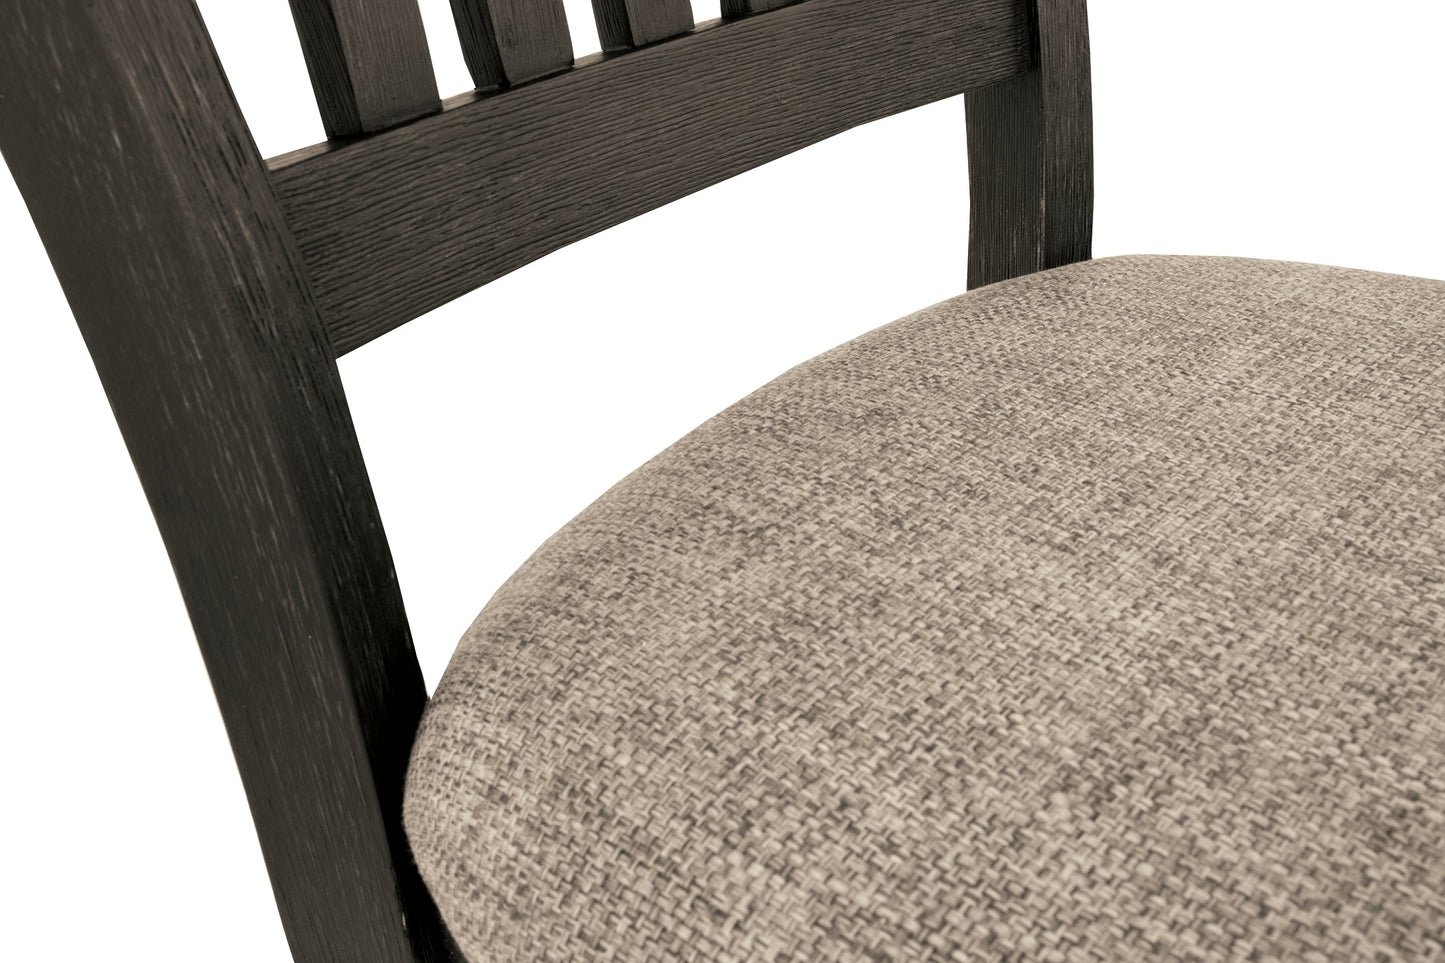 Tyler Creek Dining UPH Side Chair (2/CN) at Walker Mattress and Furniture Locations in Cedar Park and Belton TX.